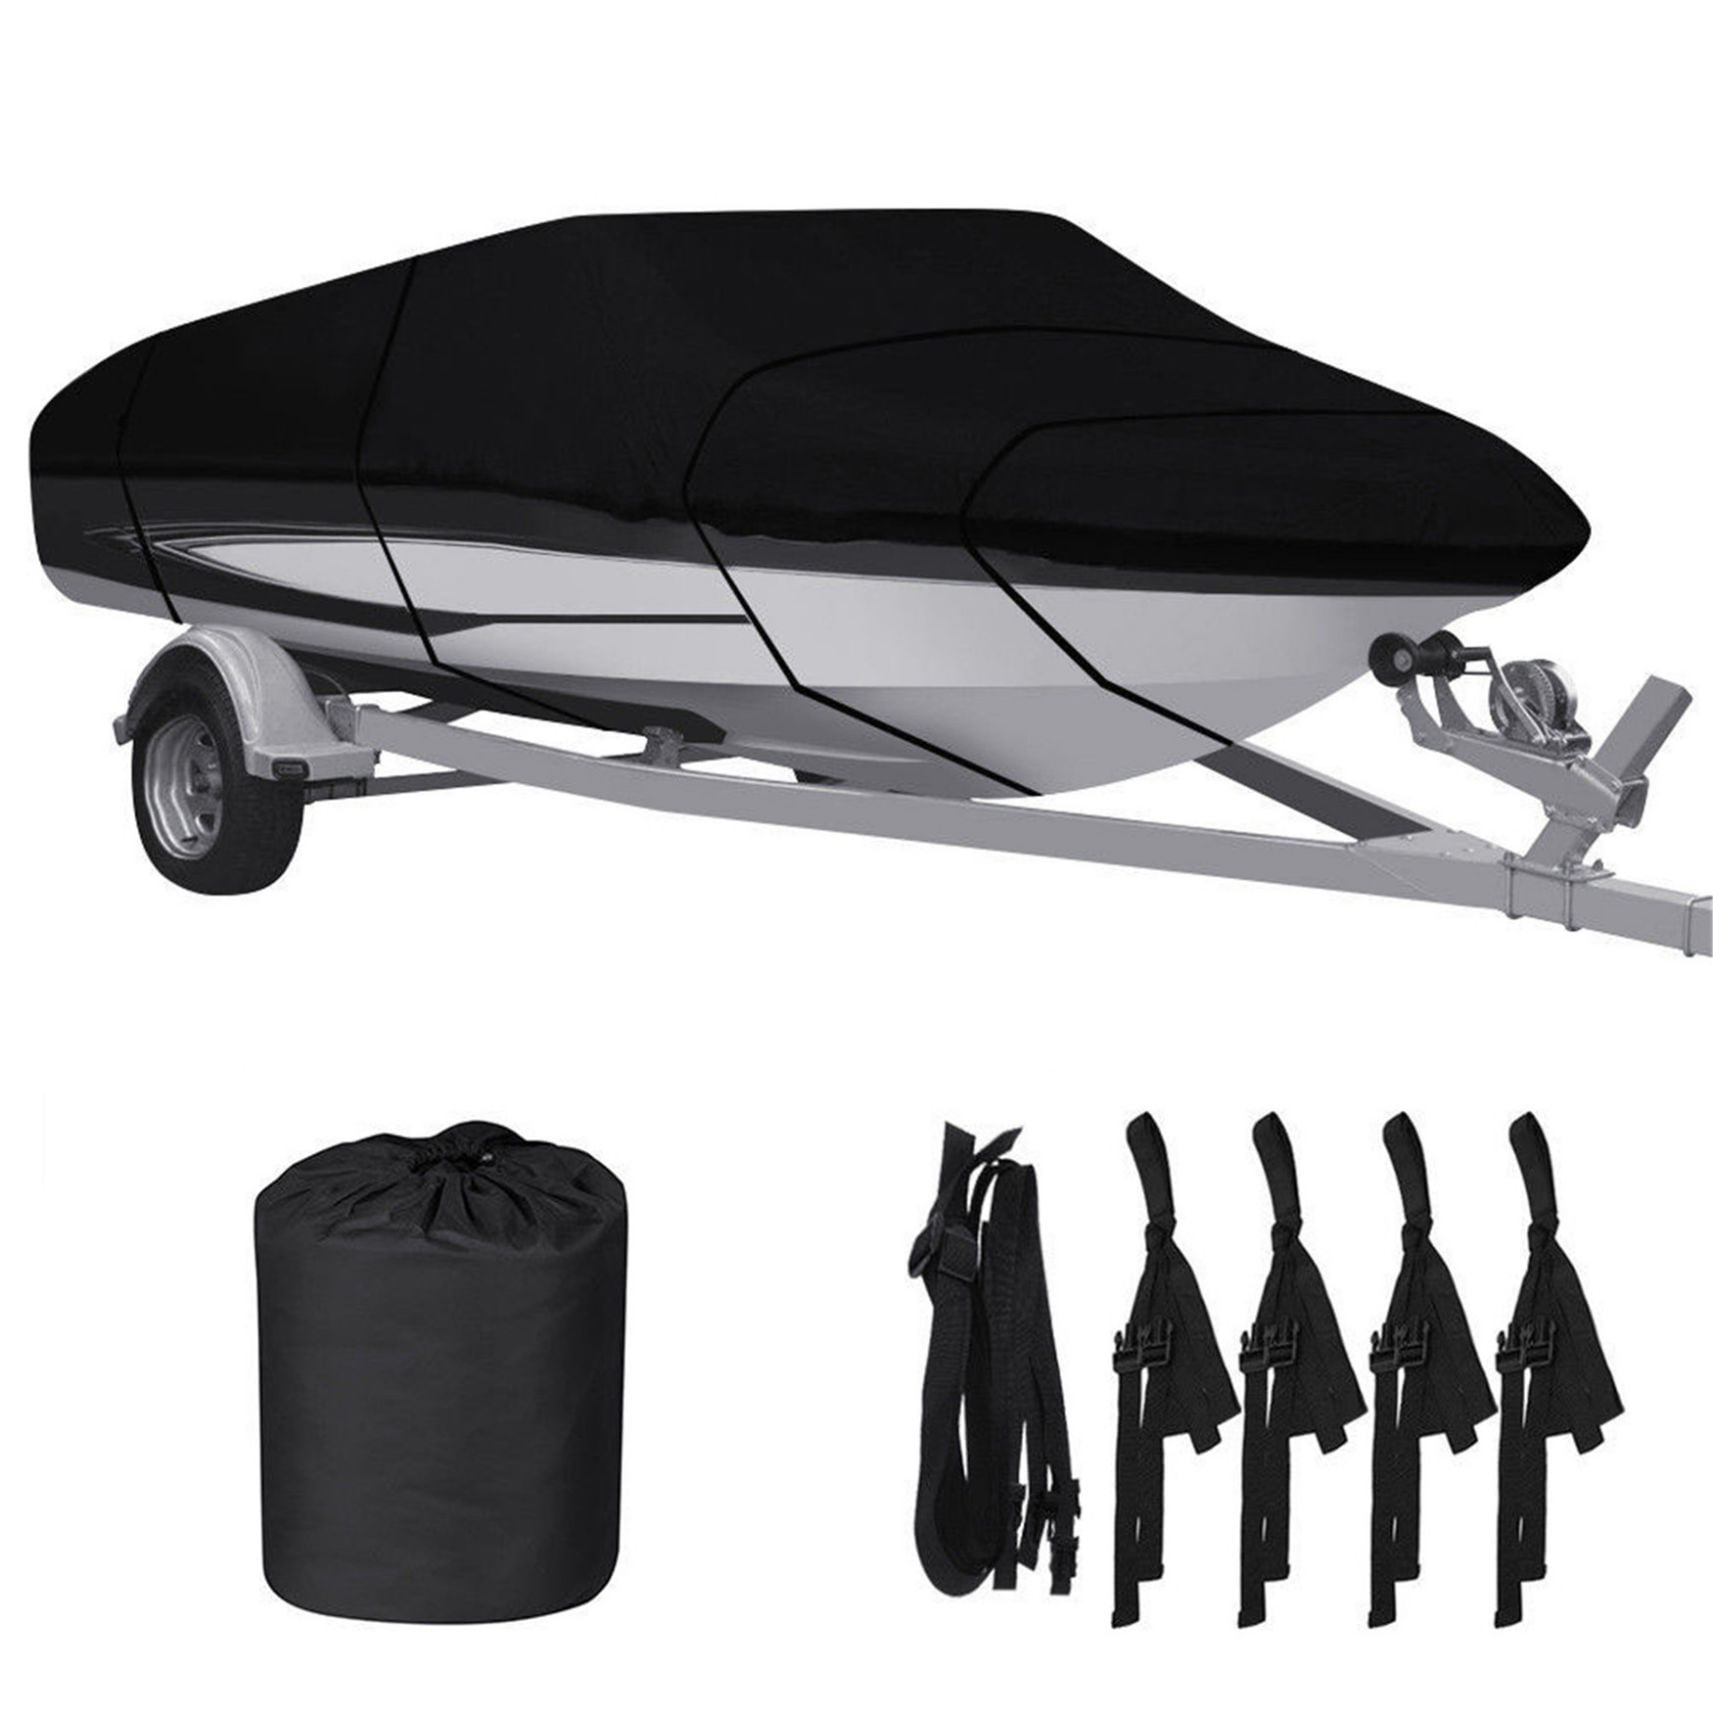 Runabout Boat Tri-Hull Color : 11, Size : 13FT XZPENG Marine Grade Trailerable Waterproof Boat Cover Heavy Duty Utility/Fishing Boats Cover Fits V-Hull 